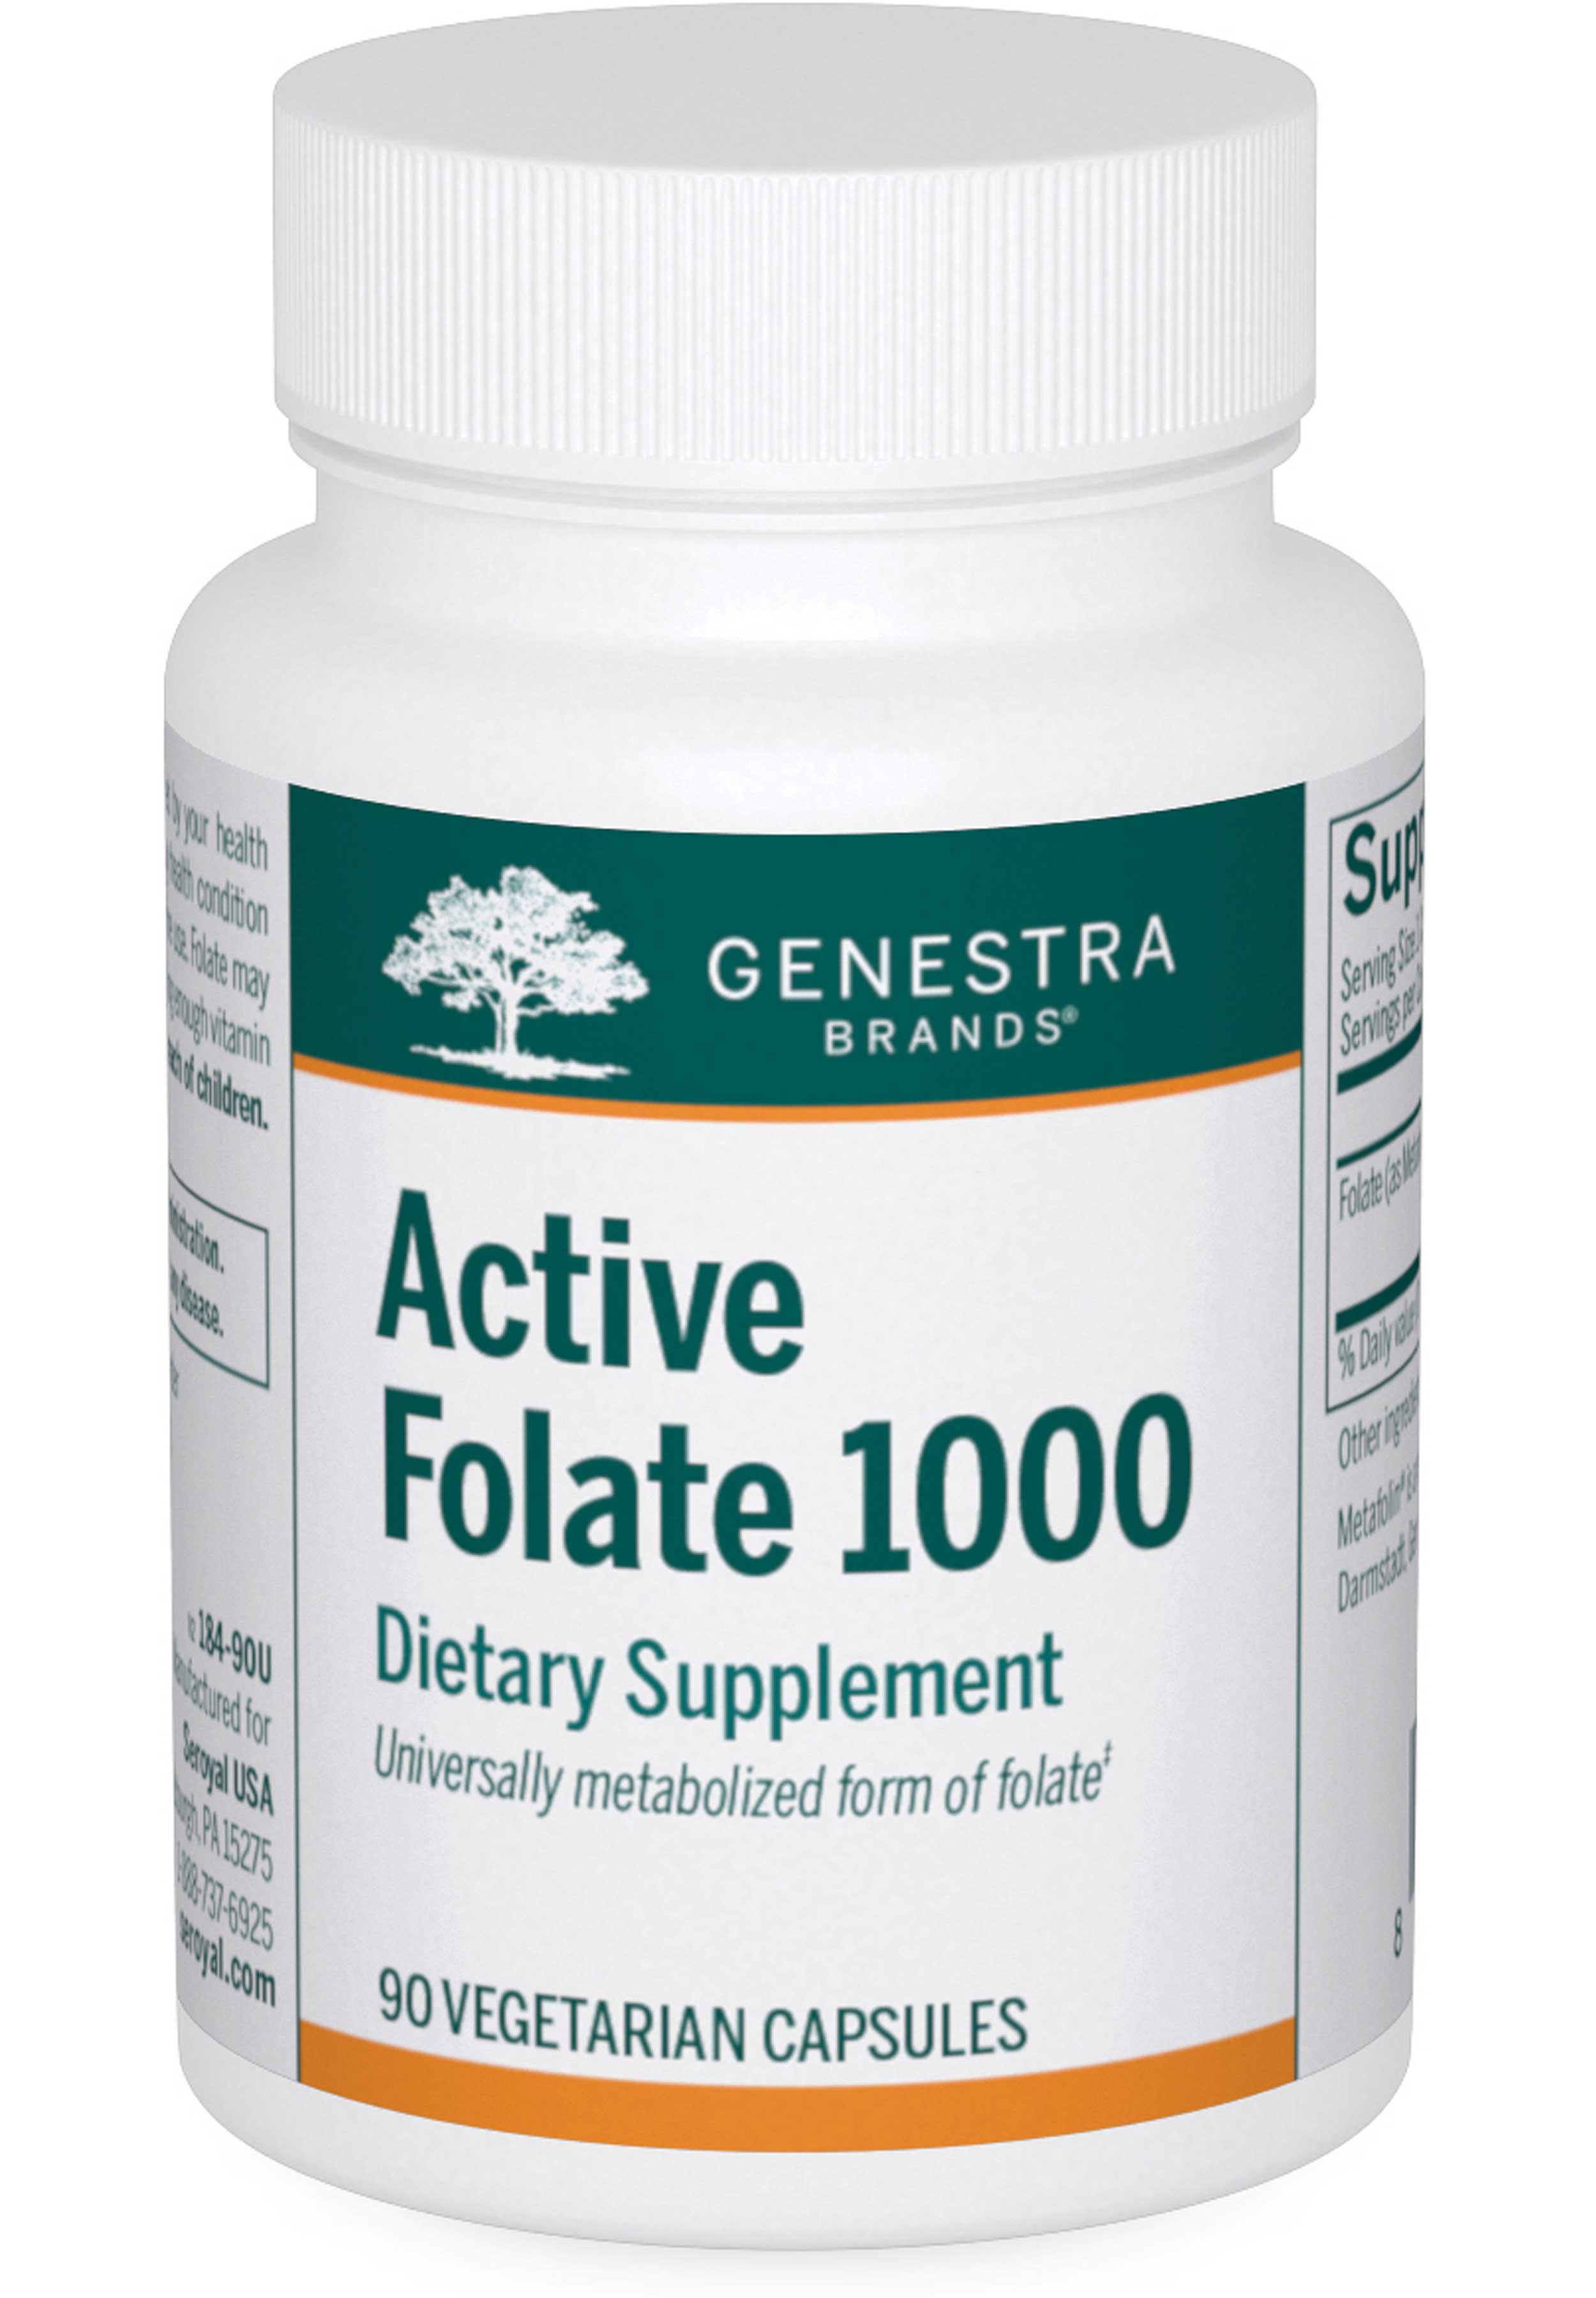 Genestra Brands Active Folate 1000